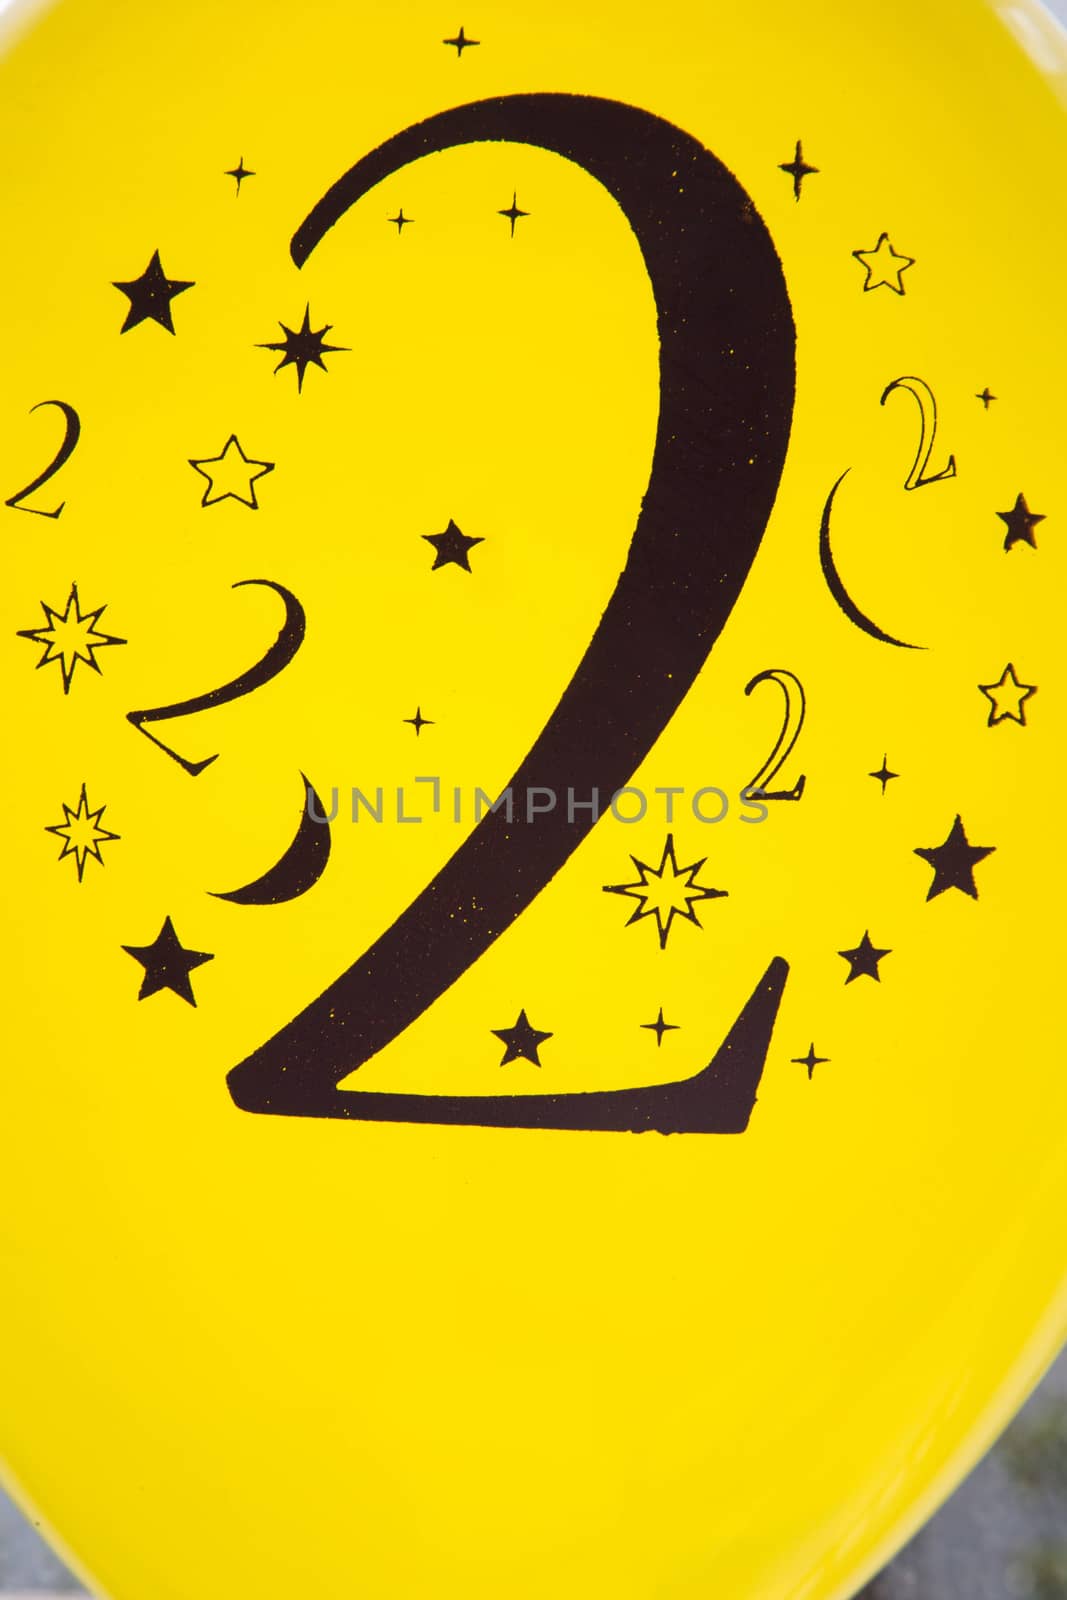 Number two printed in black on the yellow balloon